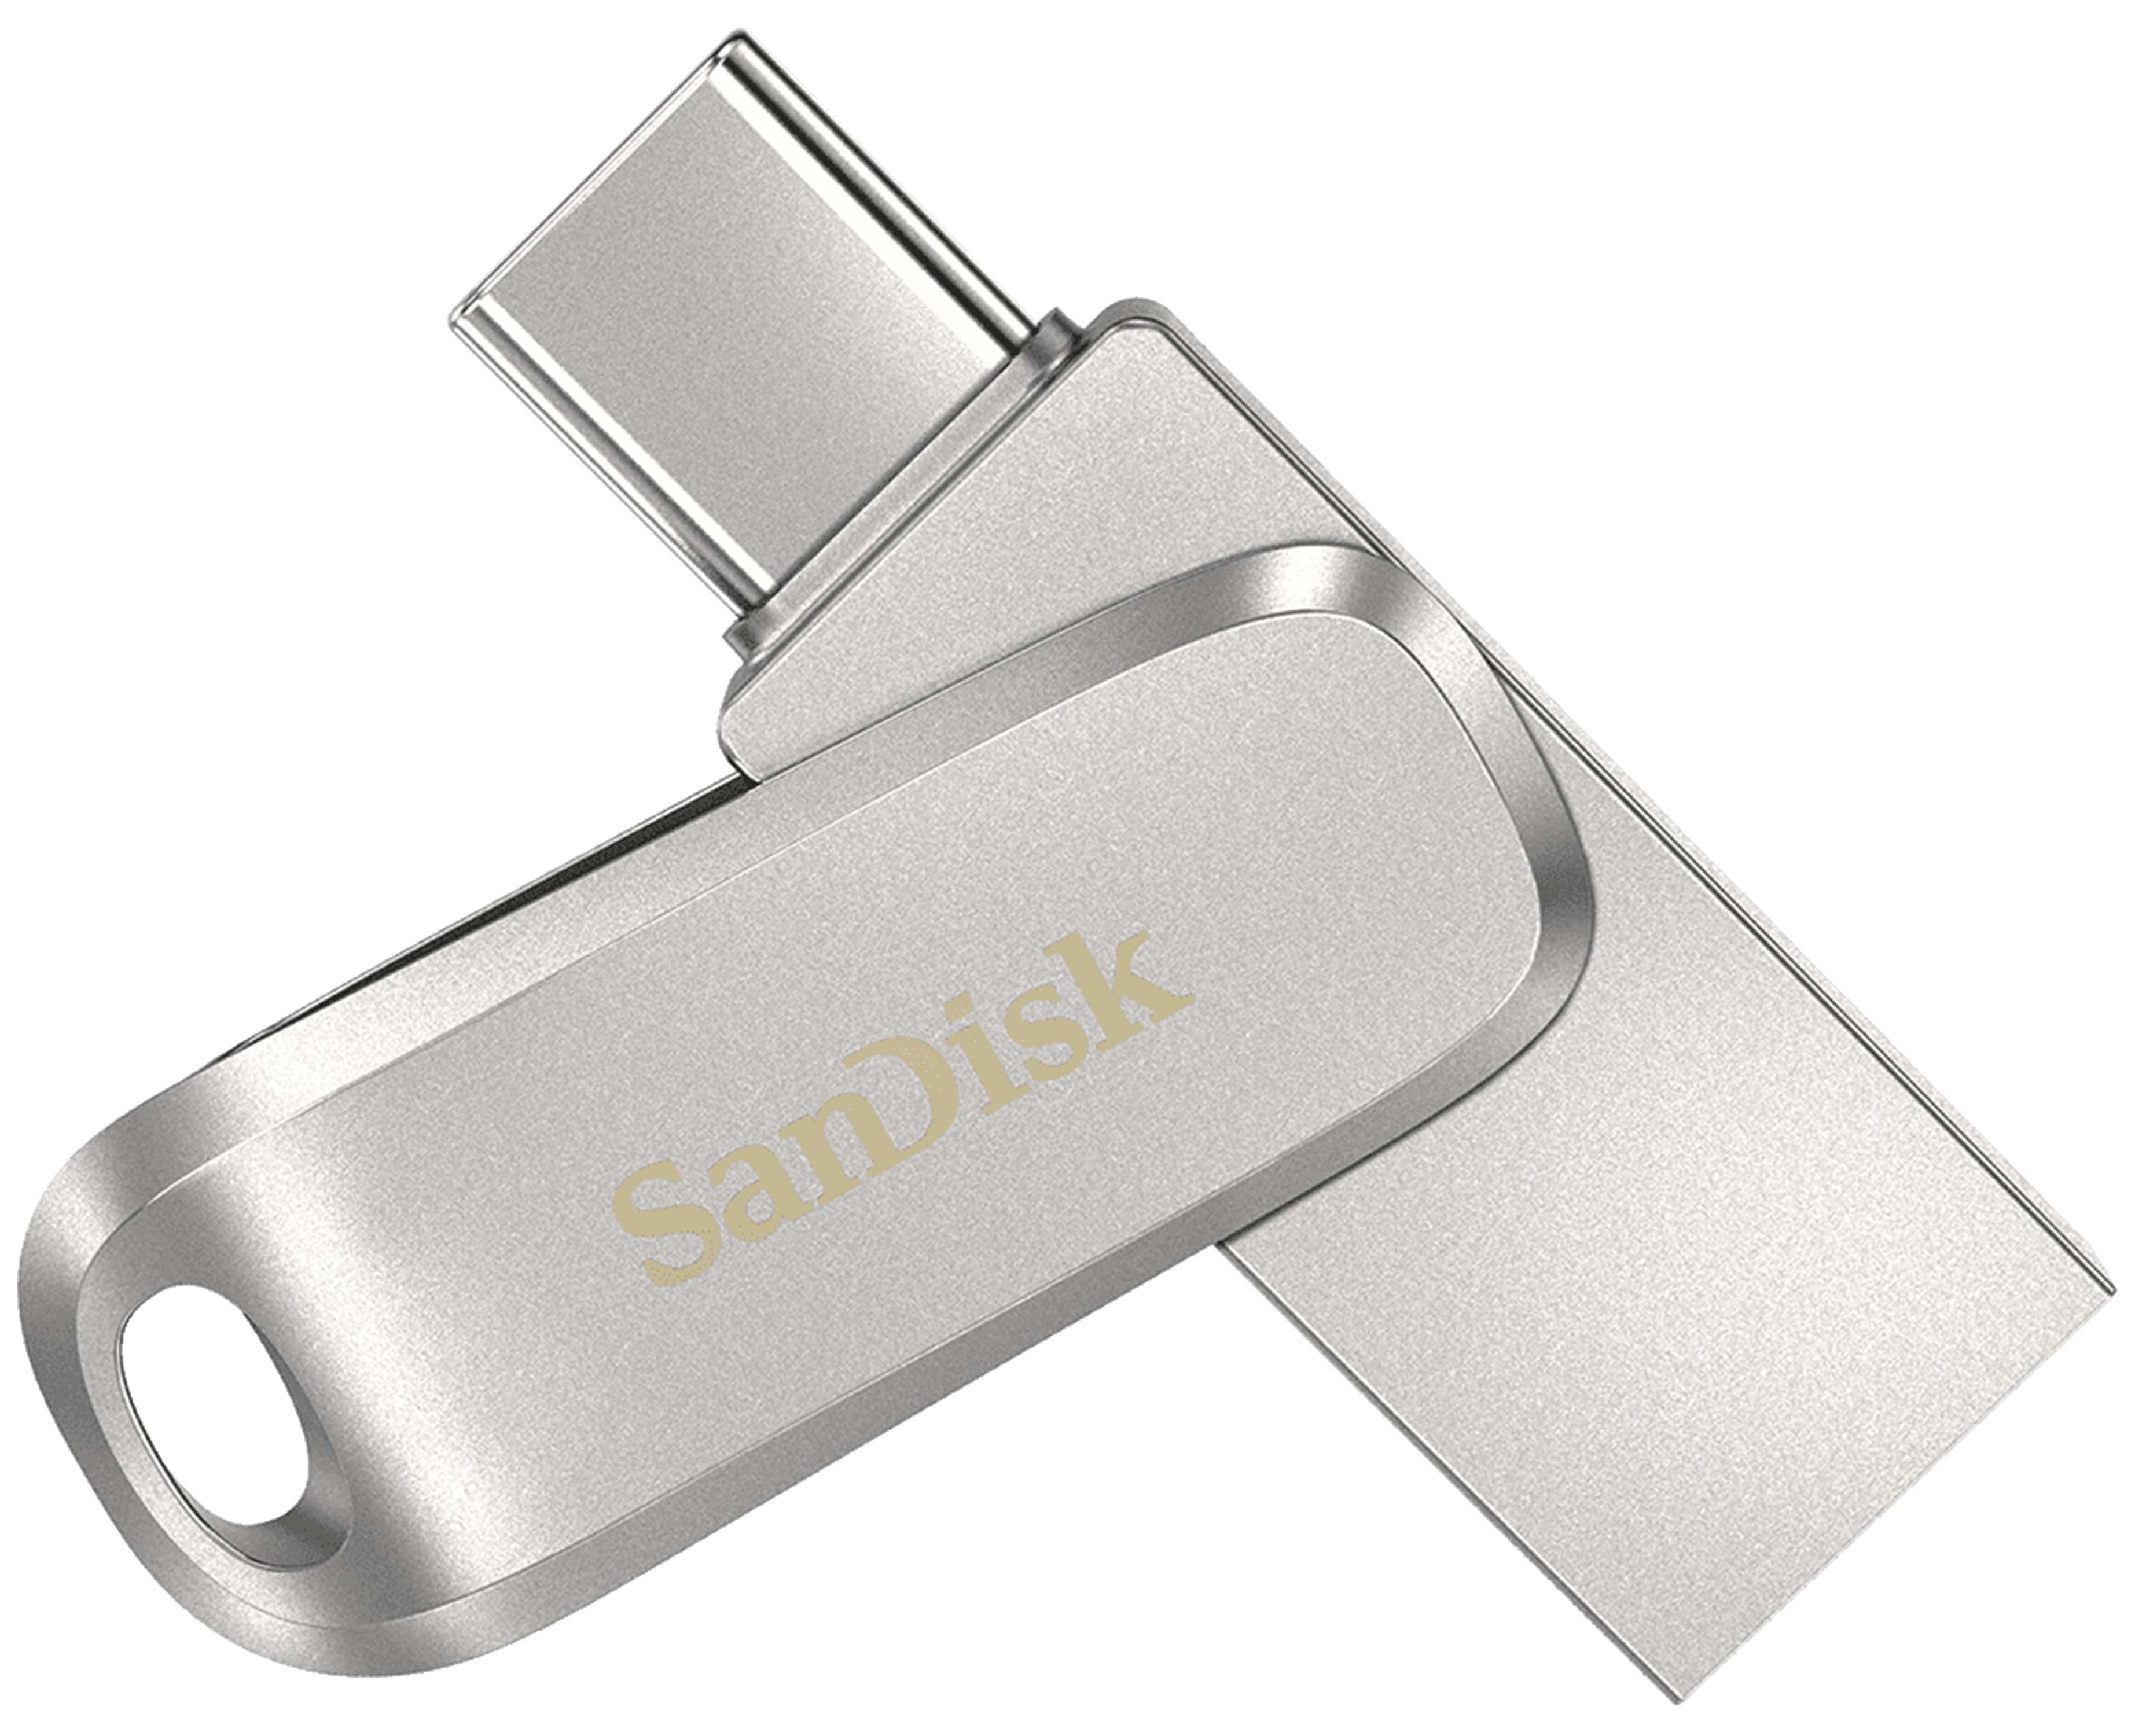 SANDISK USB Stick Ultra Dual Drive Luxe 512GB